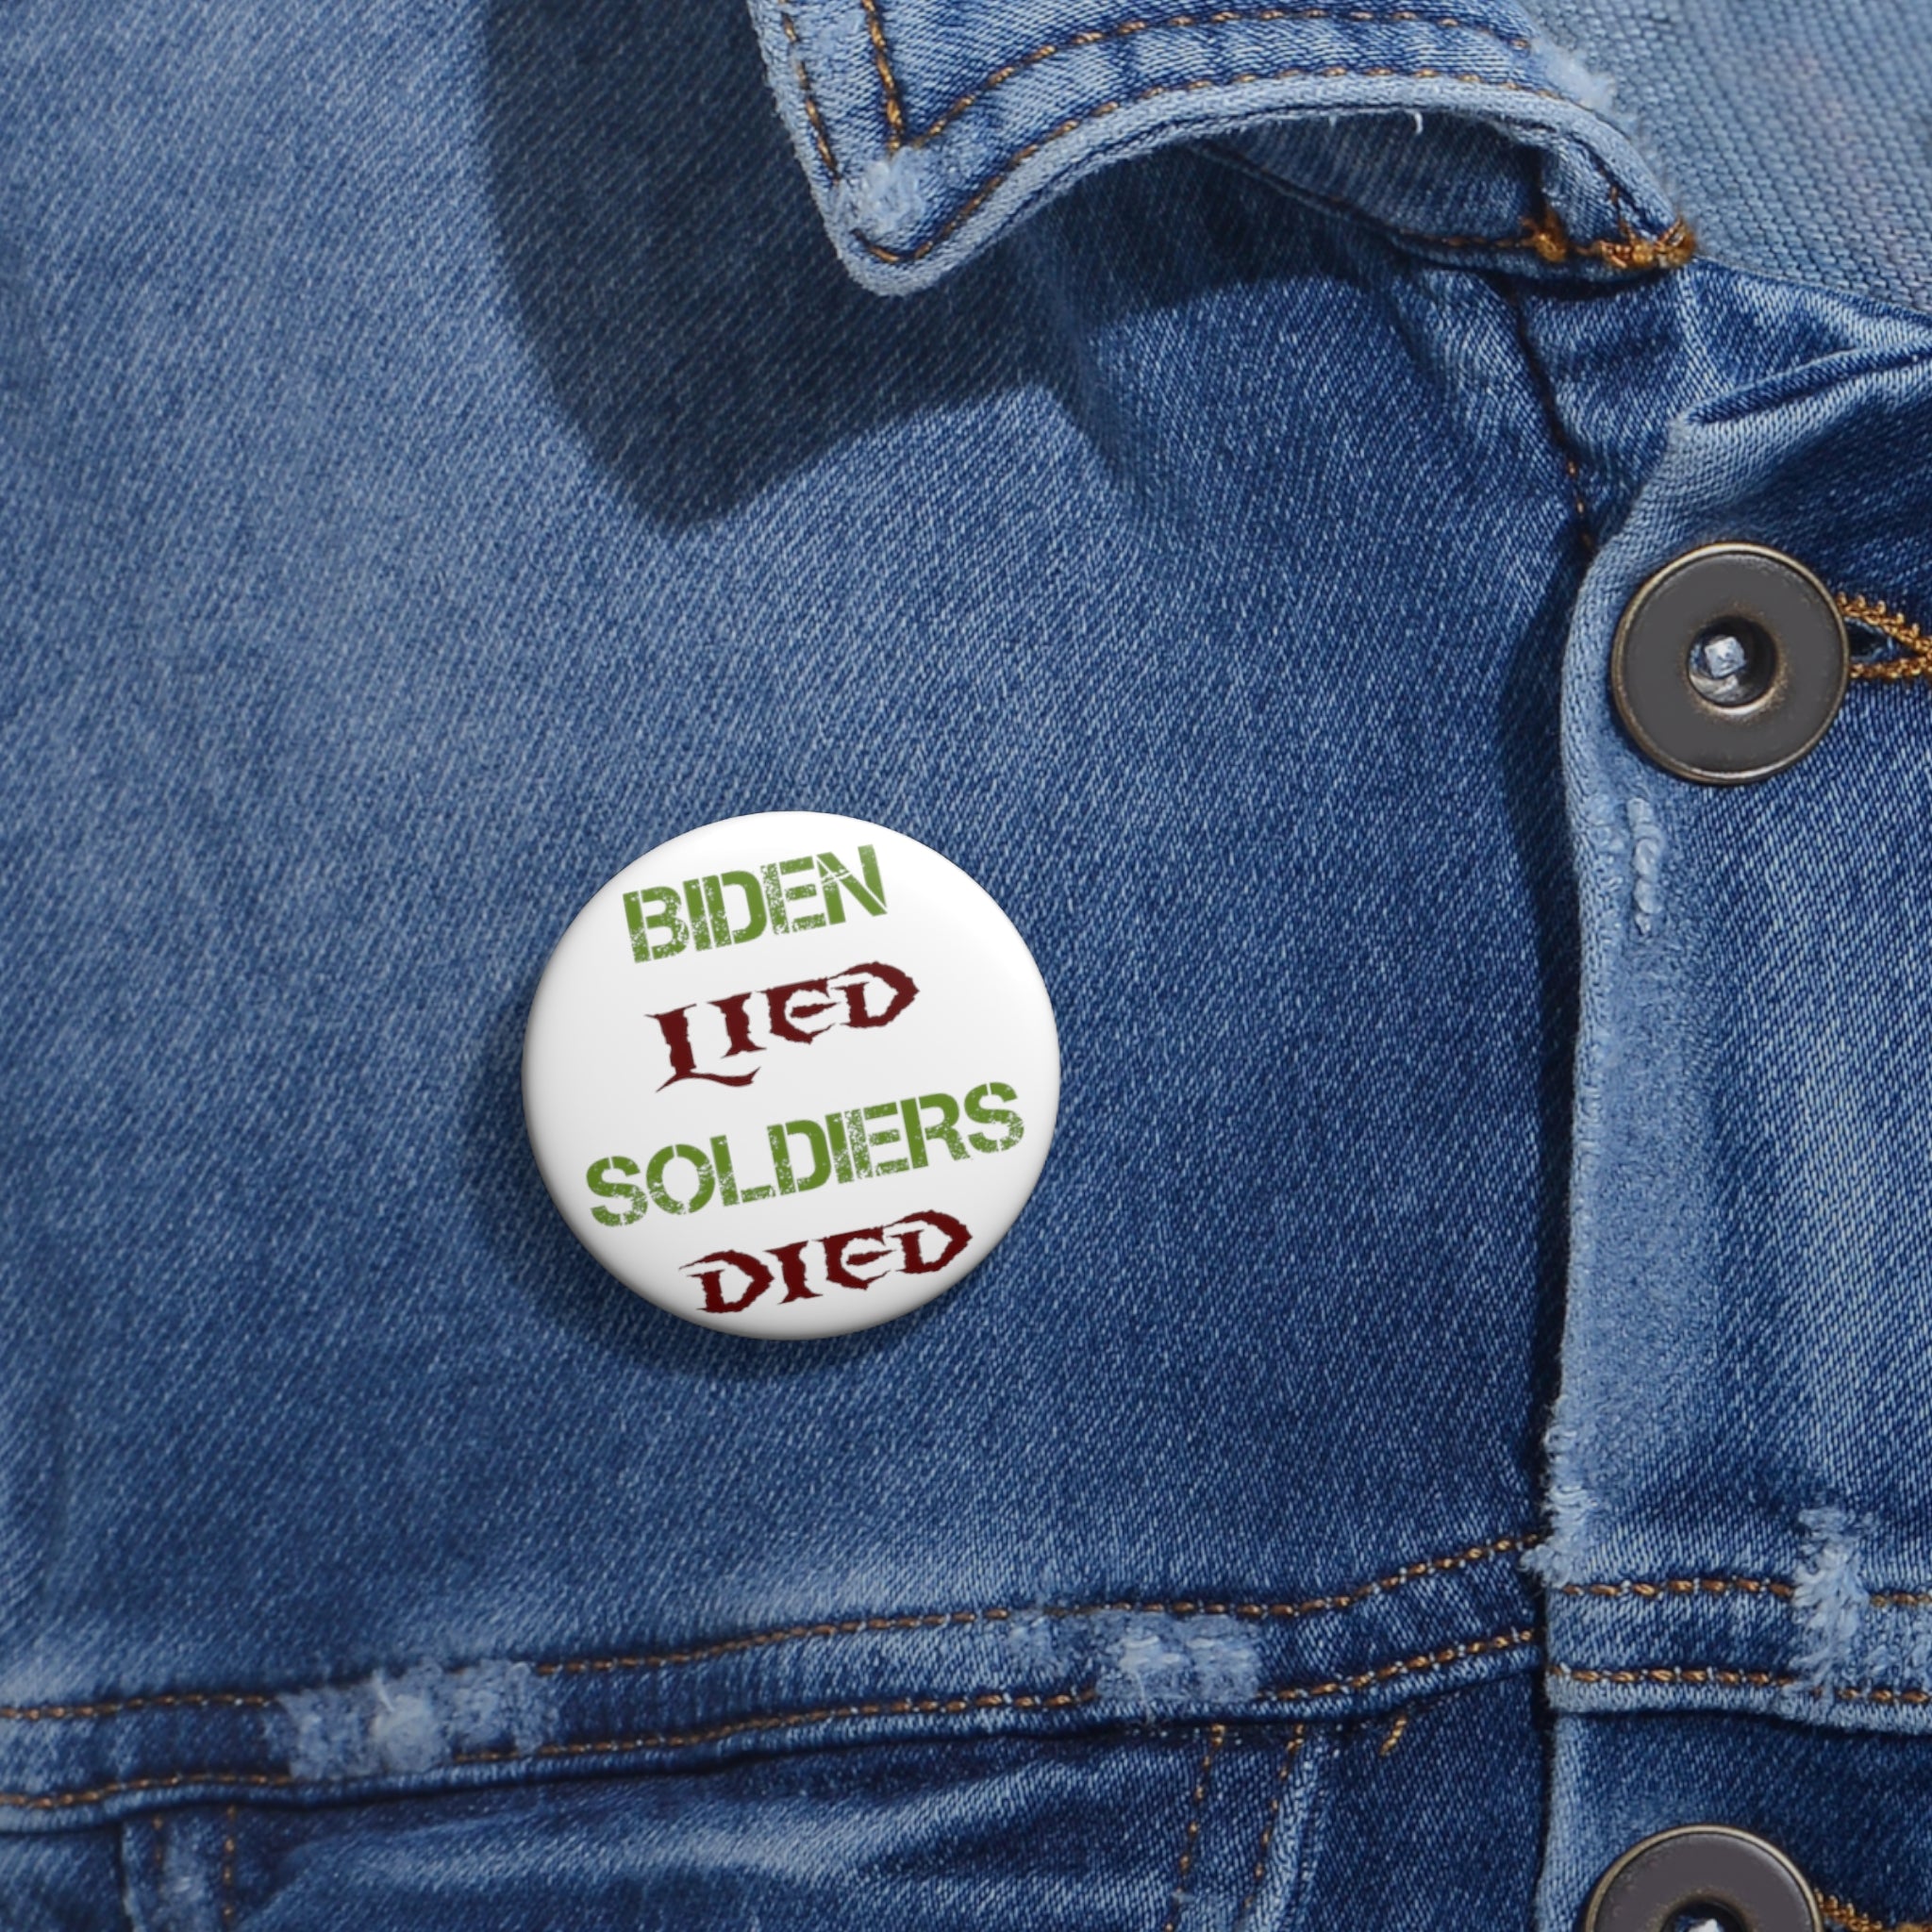 Biden Lied Soldiers Died - Pin Buttons